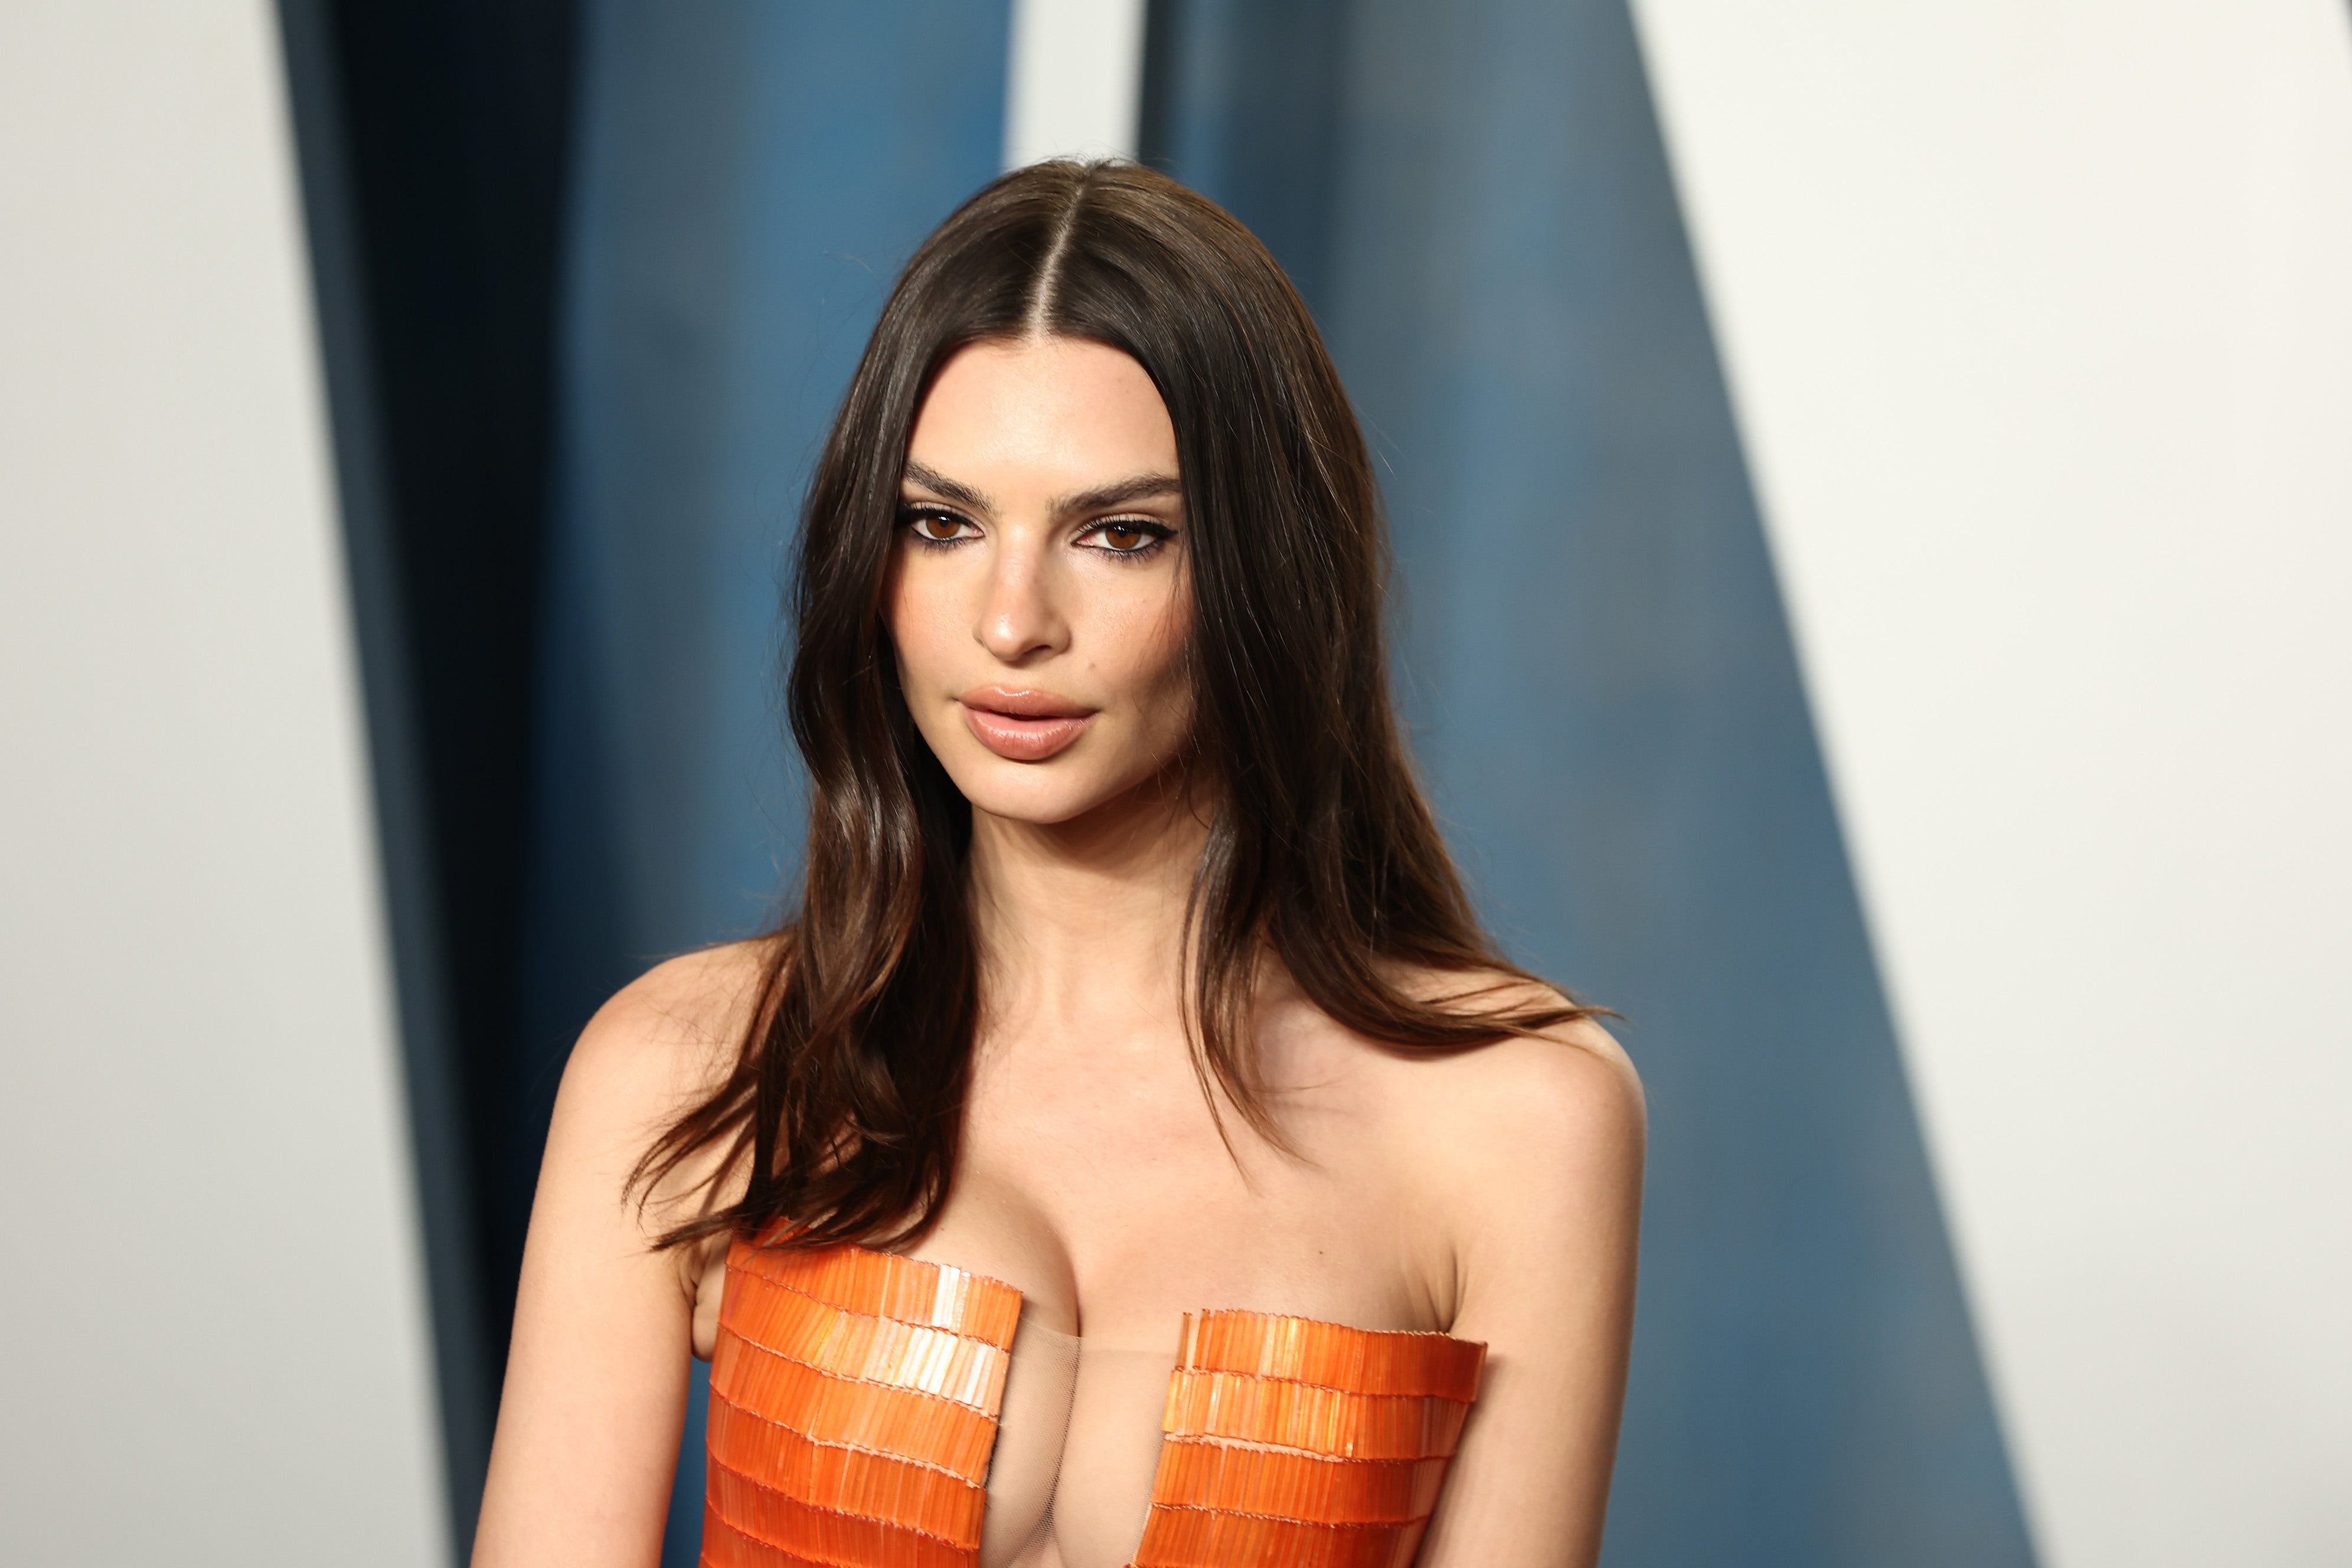 Emily Ratajkowski feared career was over after nude photo leak It was horrible Fox News